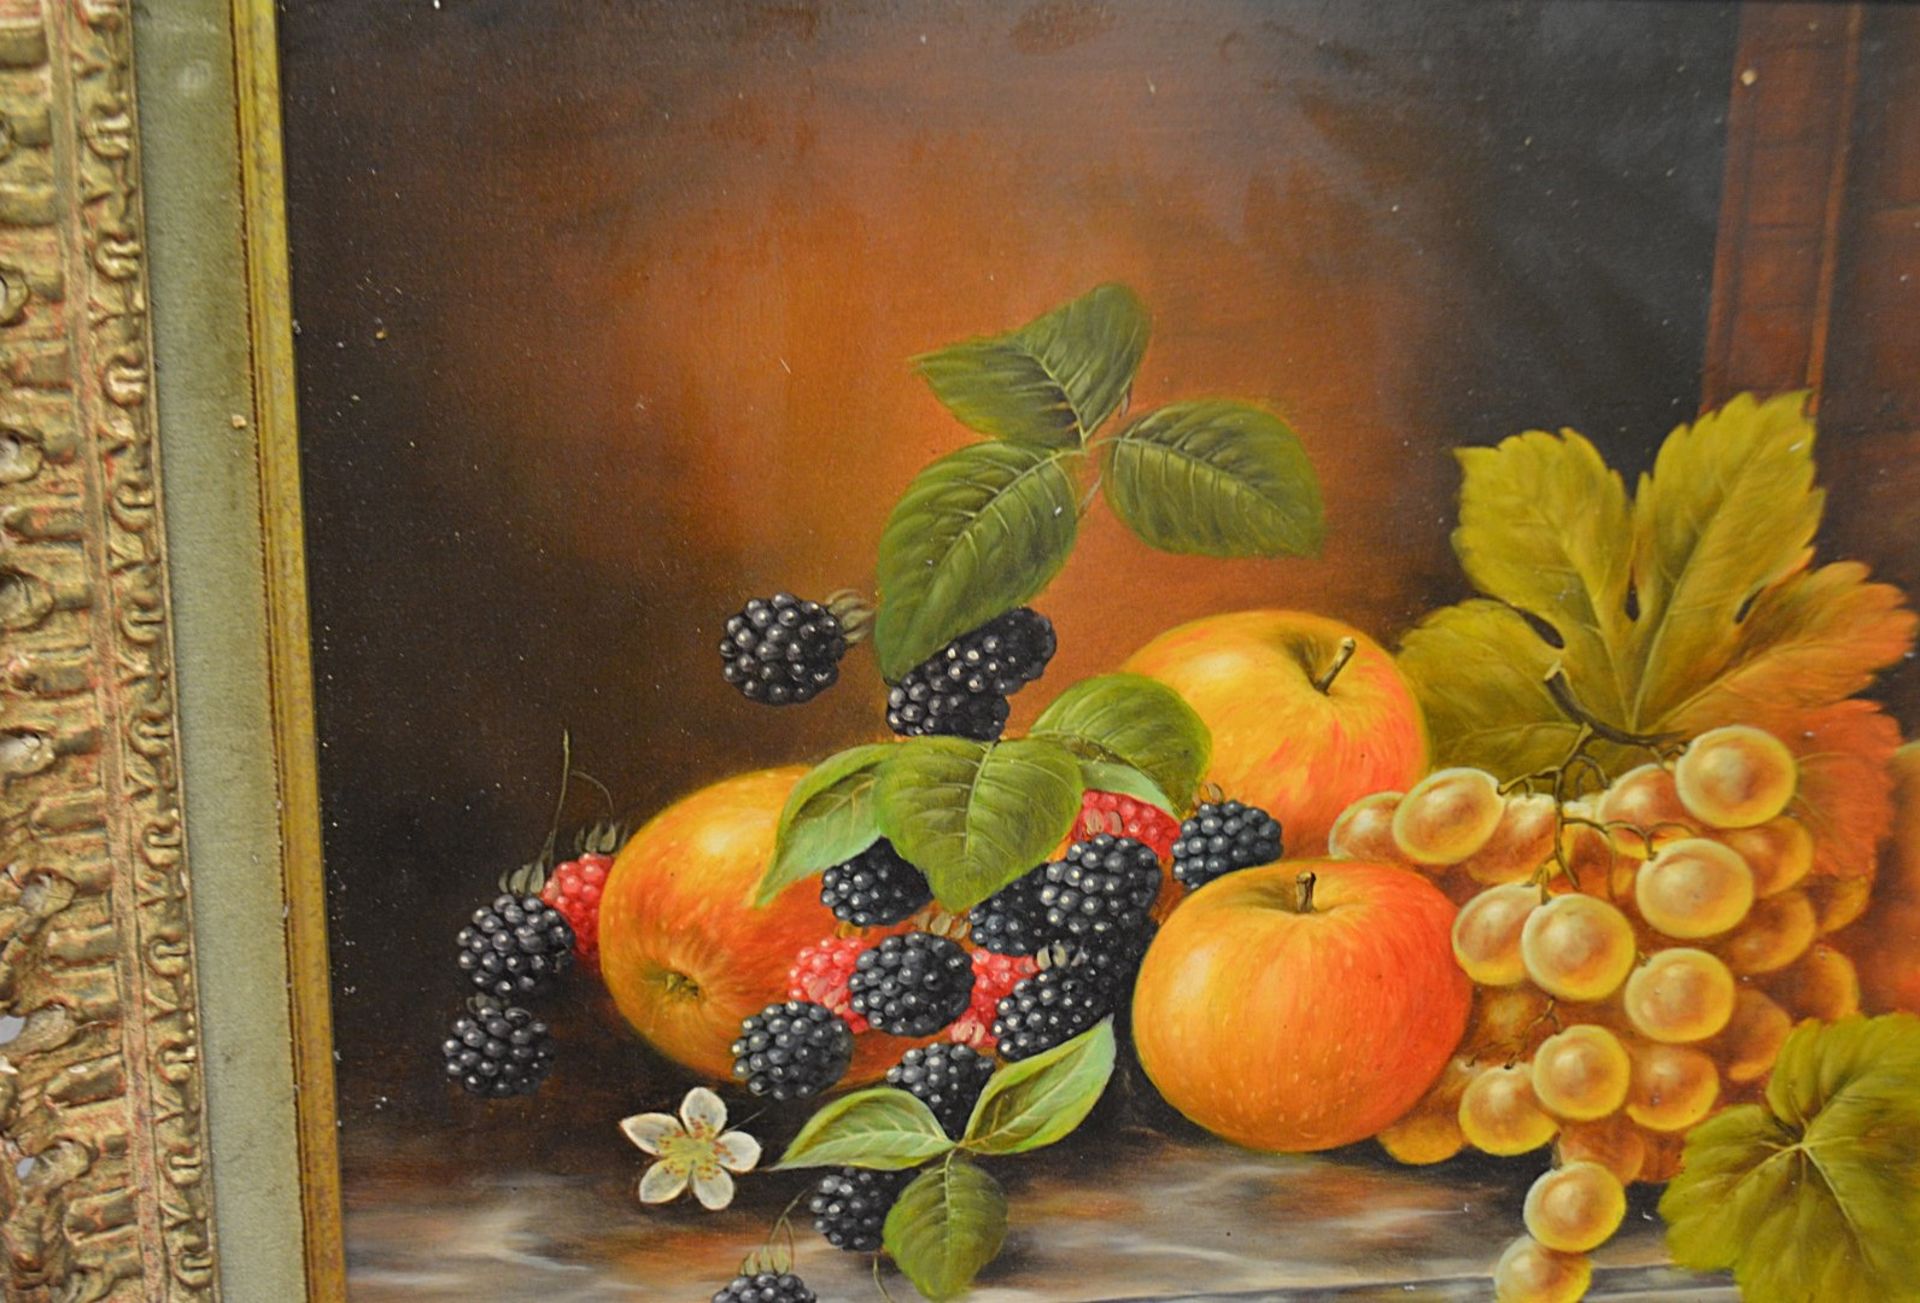 1 x Framed Picture Of Fruit - Dimensions: 52 x 42cm - Ref: MD164 / WH1 D-OFF - Pre-owned, From A - Image 2 of 5